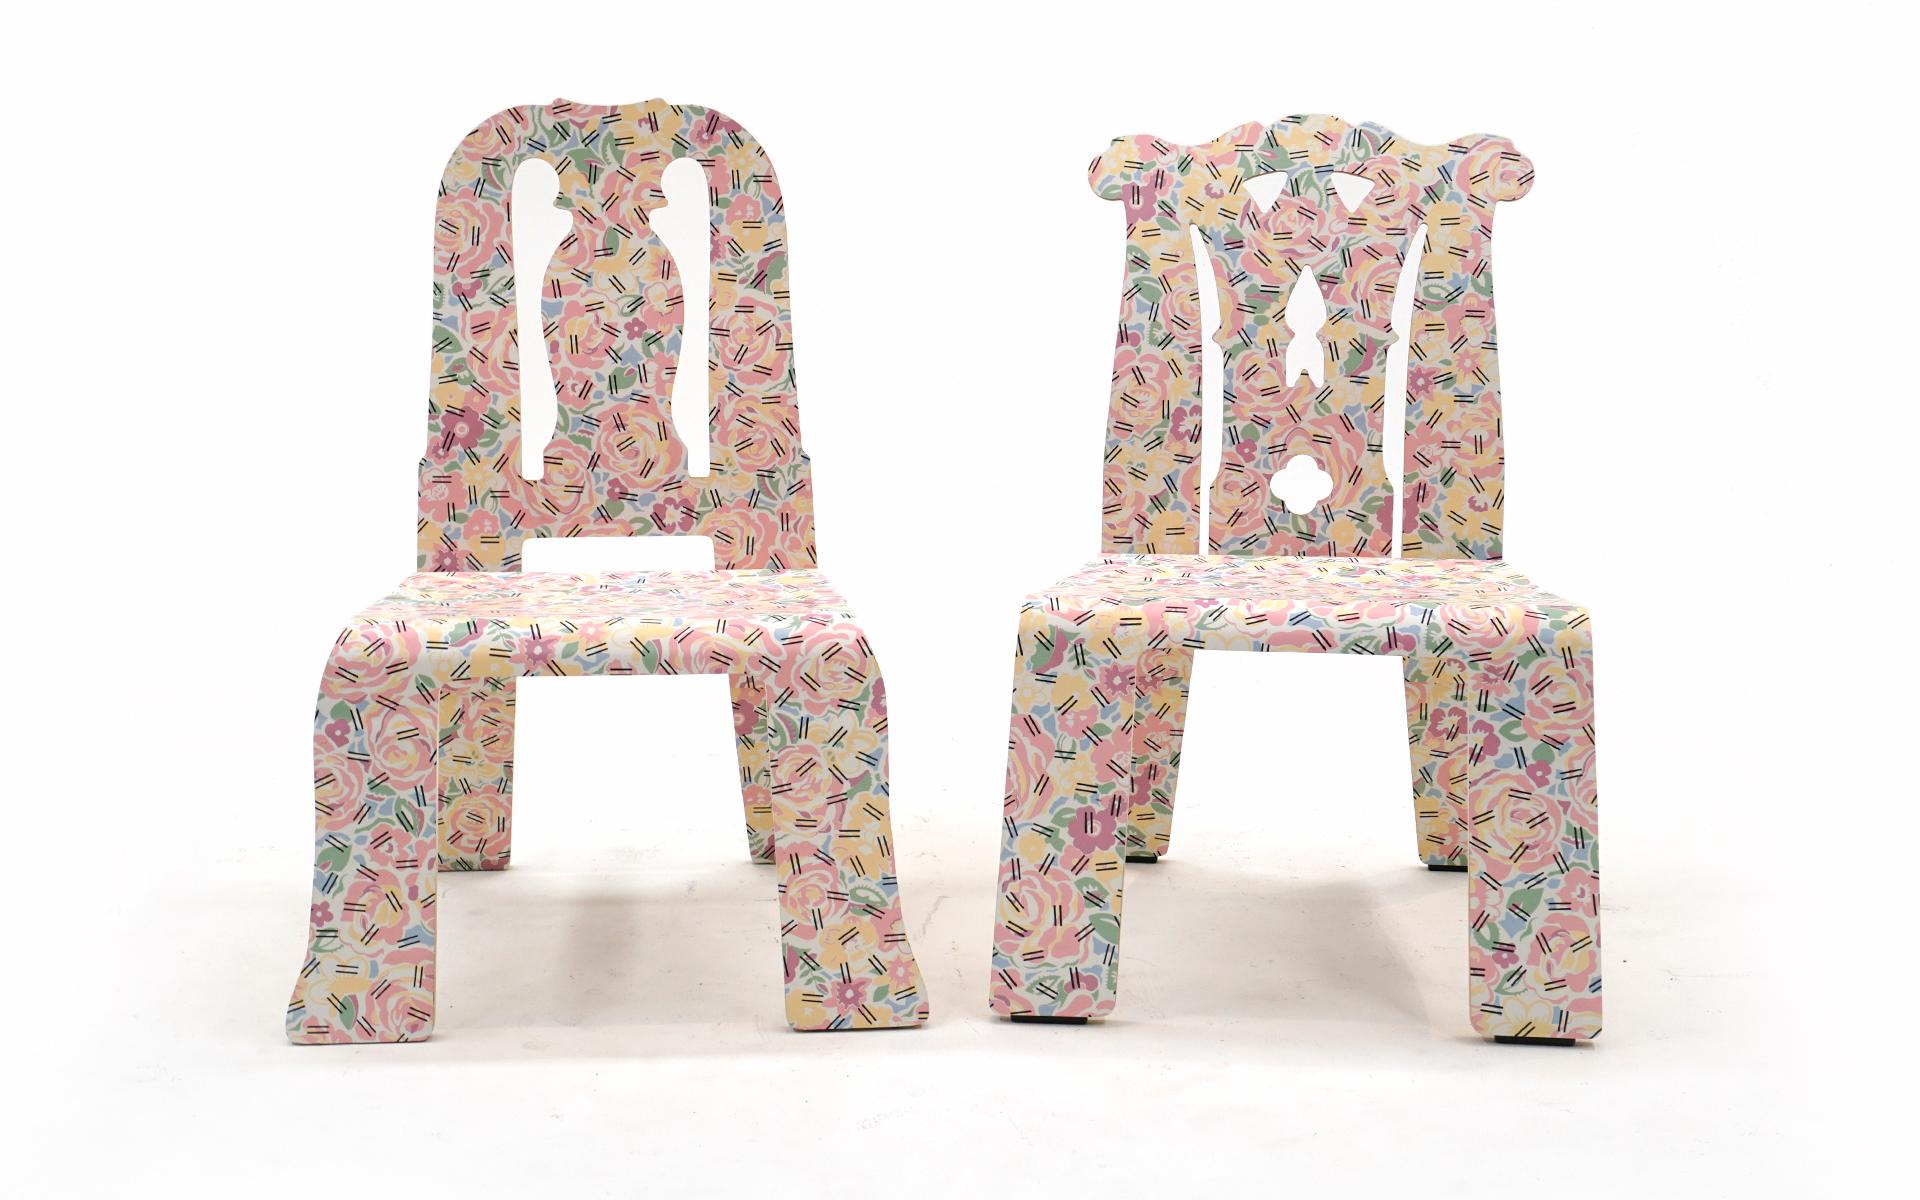 Great pair of chairs designed by Robert Venturi and Denise Scott Brown. One Chippendale and one Queen Anne, both in the 